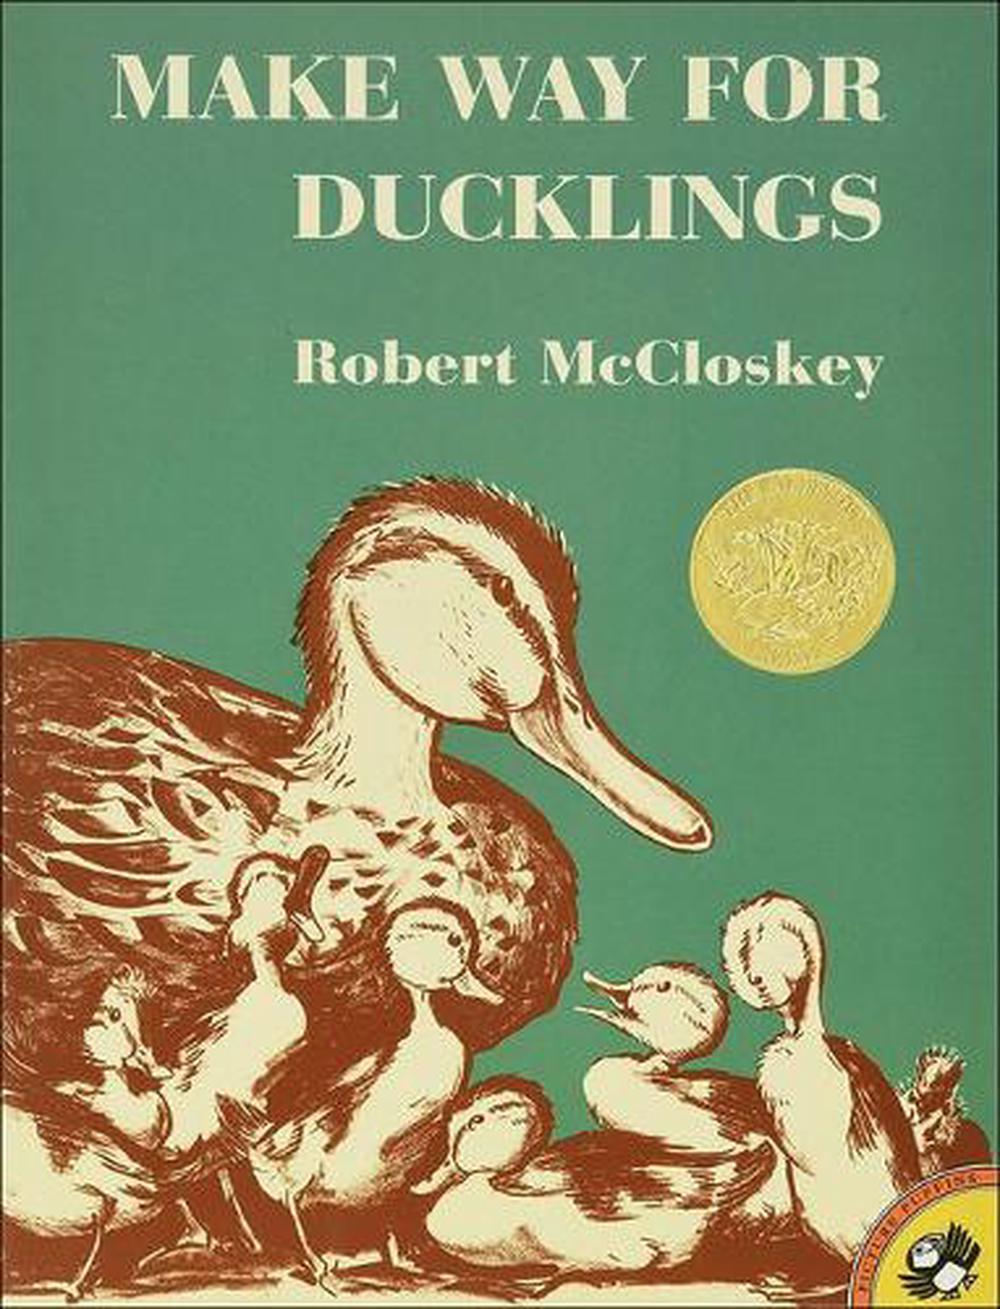 make way for ducklings by robert mccloskey